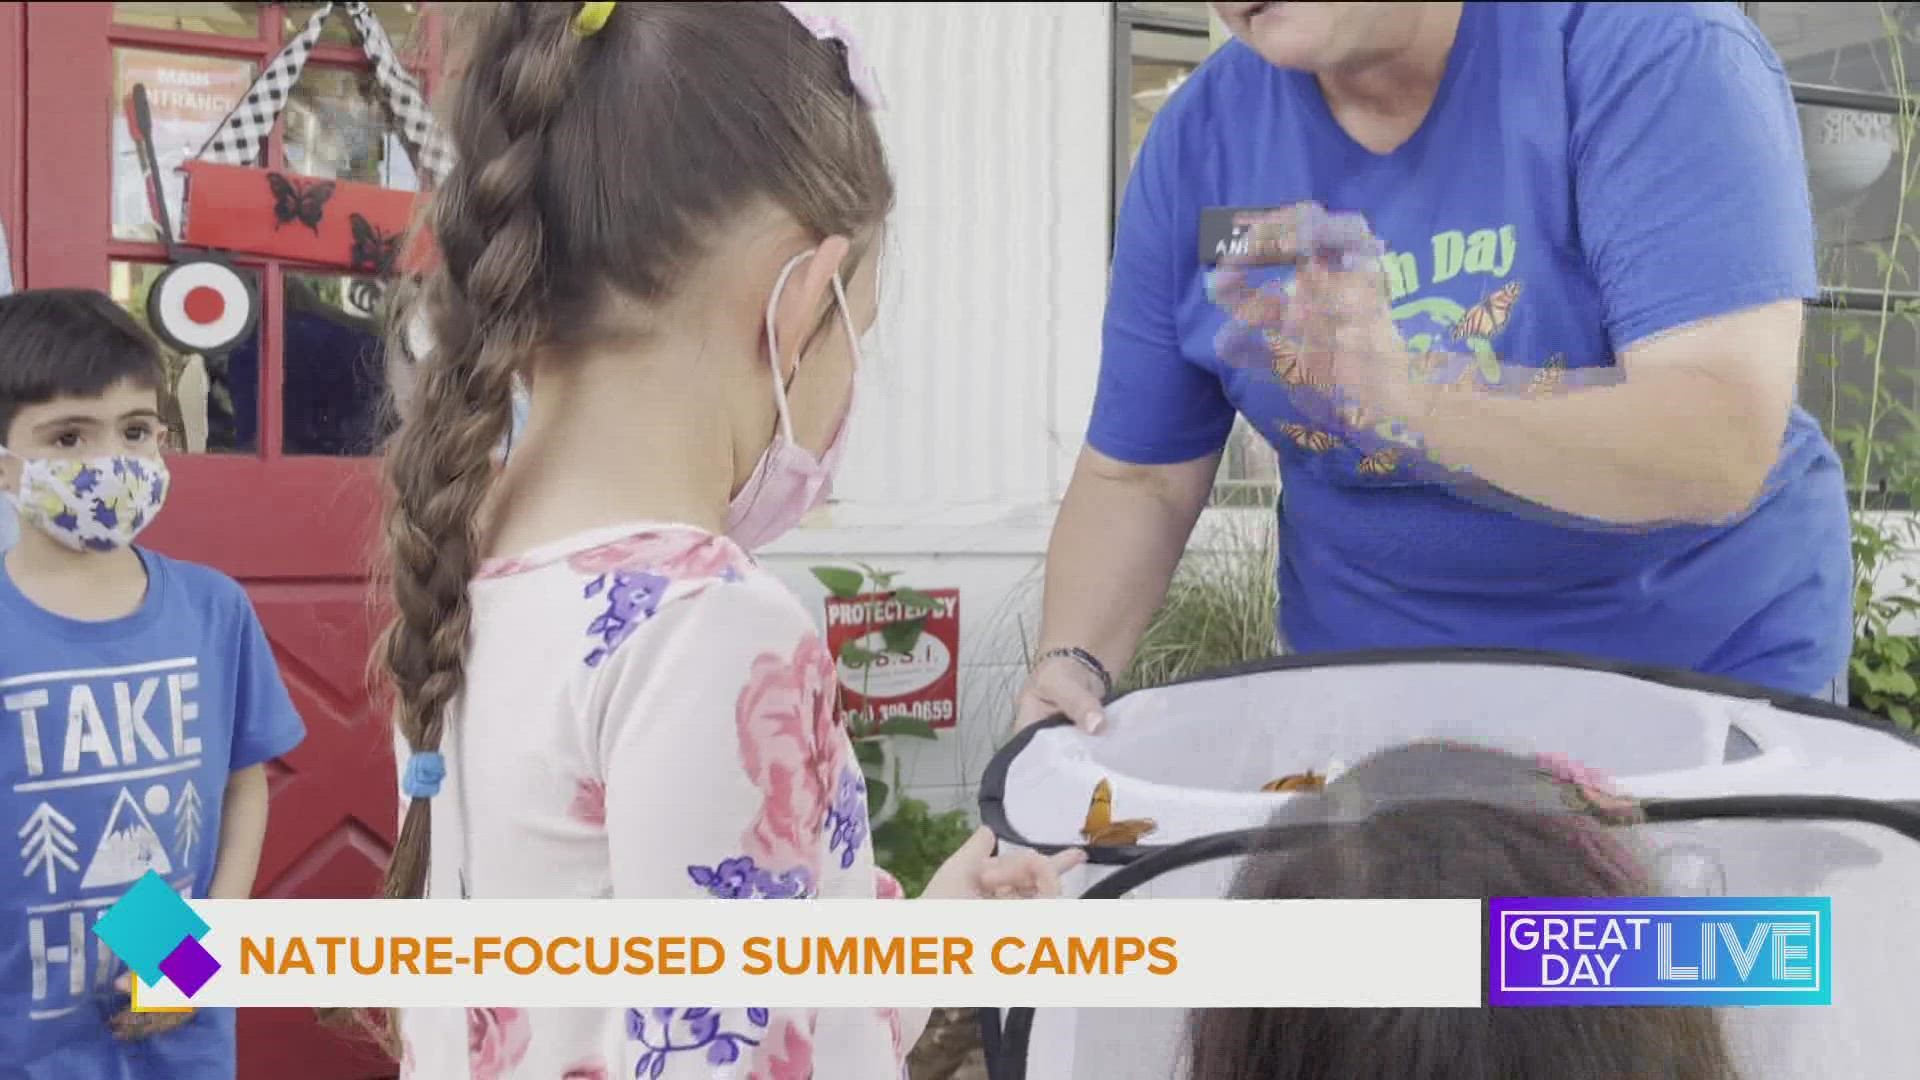 If your kids like to get their hands dirty, check out the summer camps at the Little Red Wagon plant nursery. From backyard bugs to creatures’ tree house, there’s so